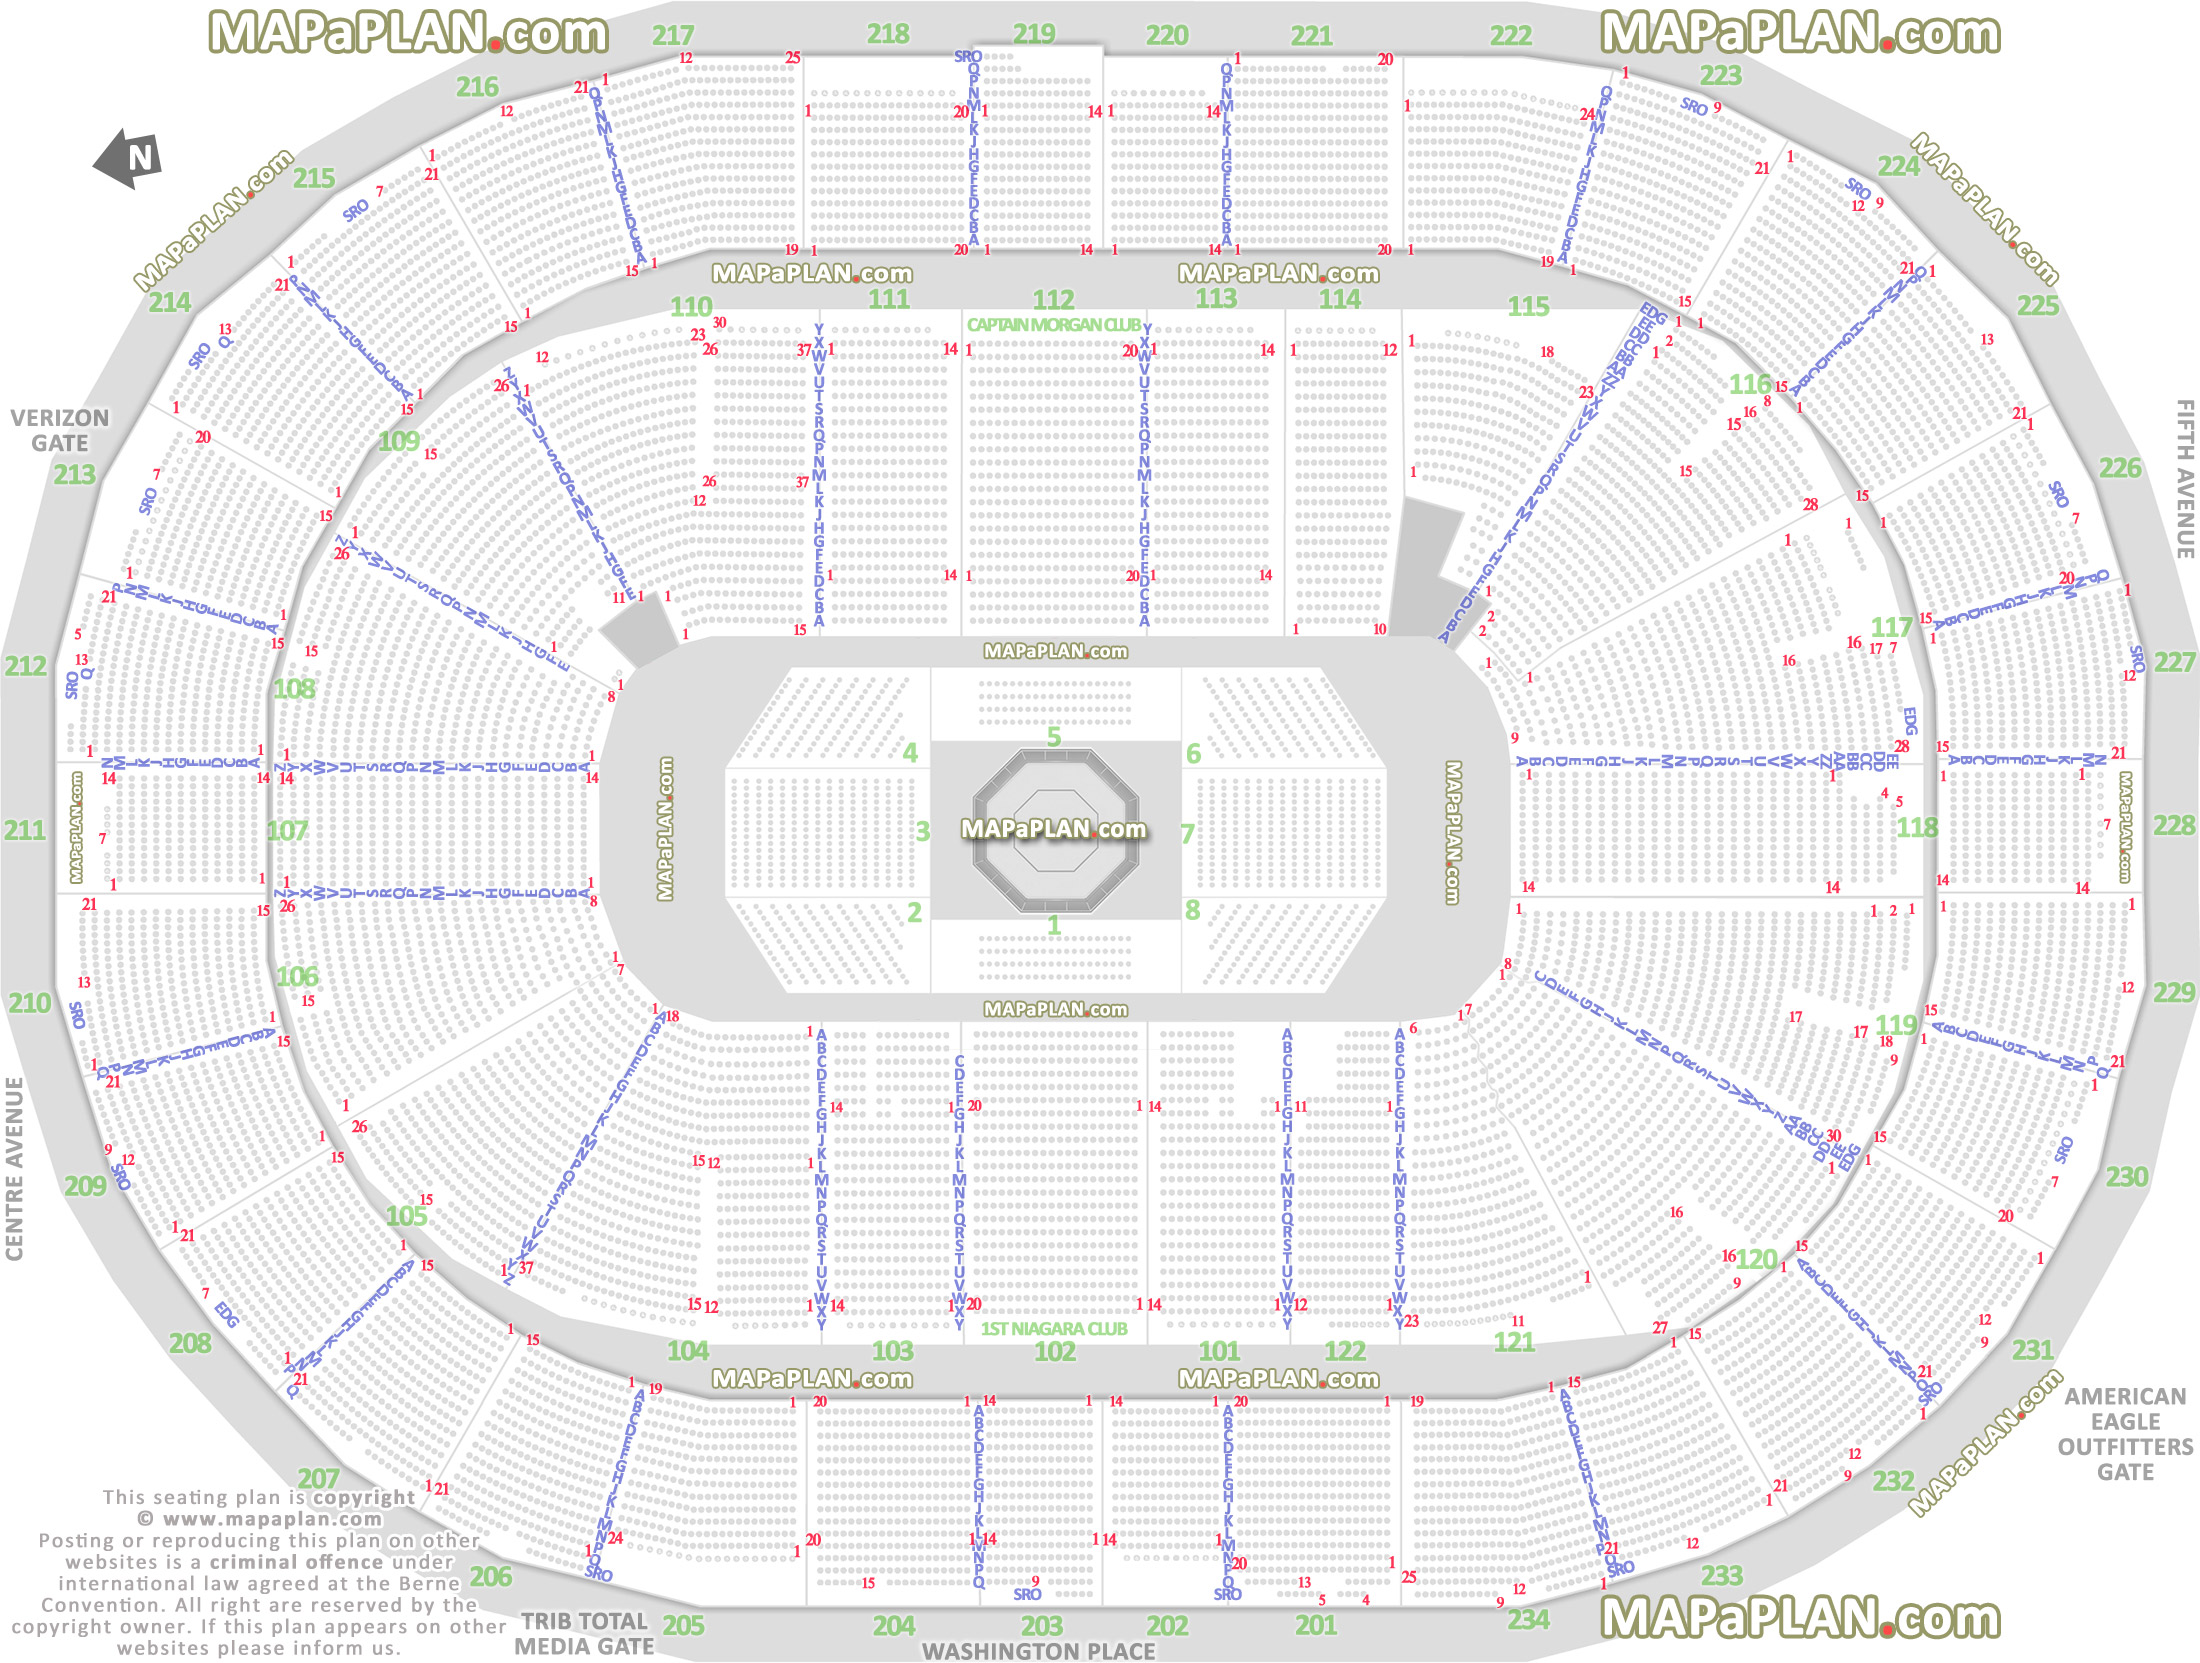 ufc mma fights fully seated setup chart viewer main entrance gates map wheelchair disabled seating Pittsburgh PPG Paints Arena seating chart